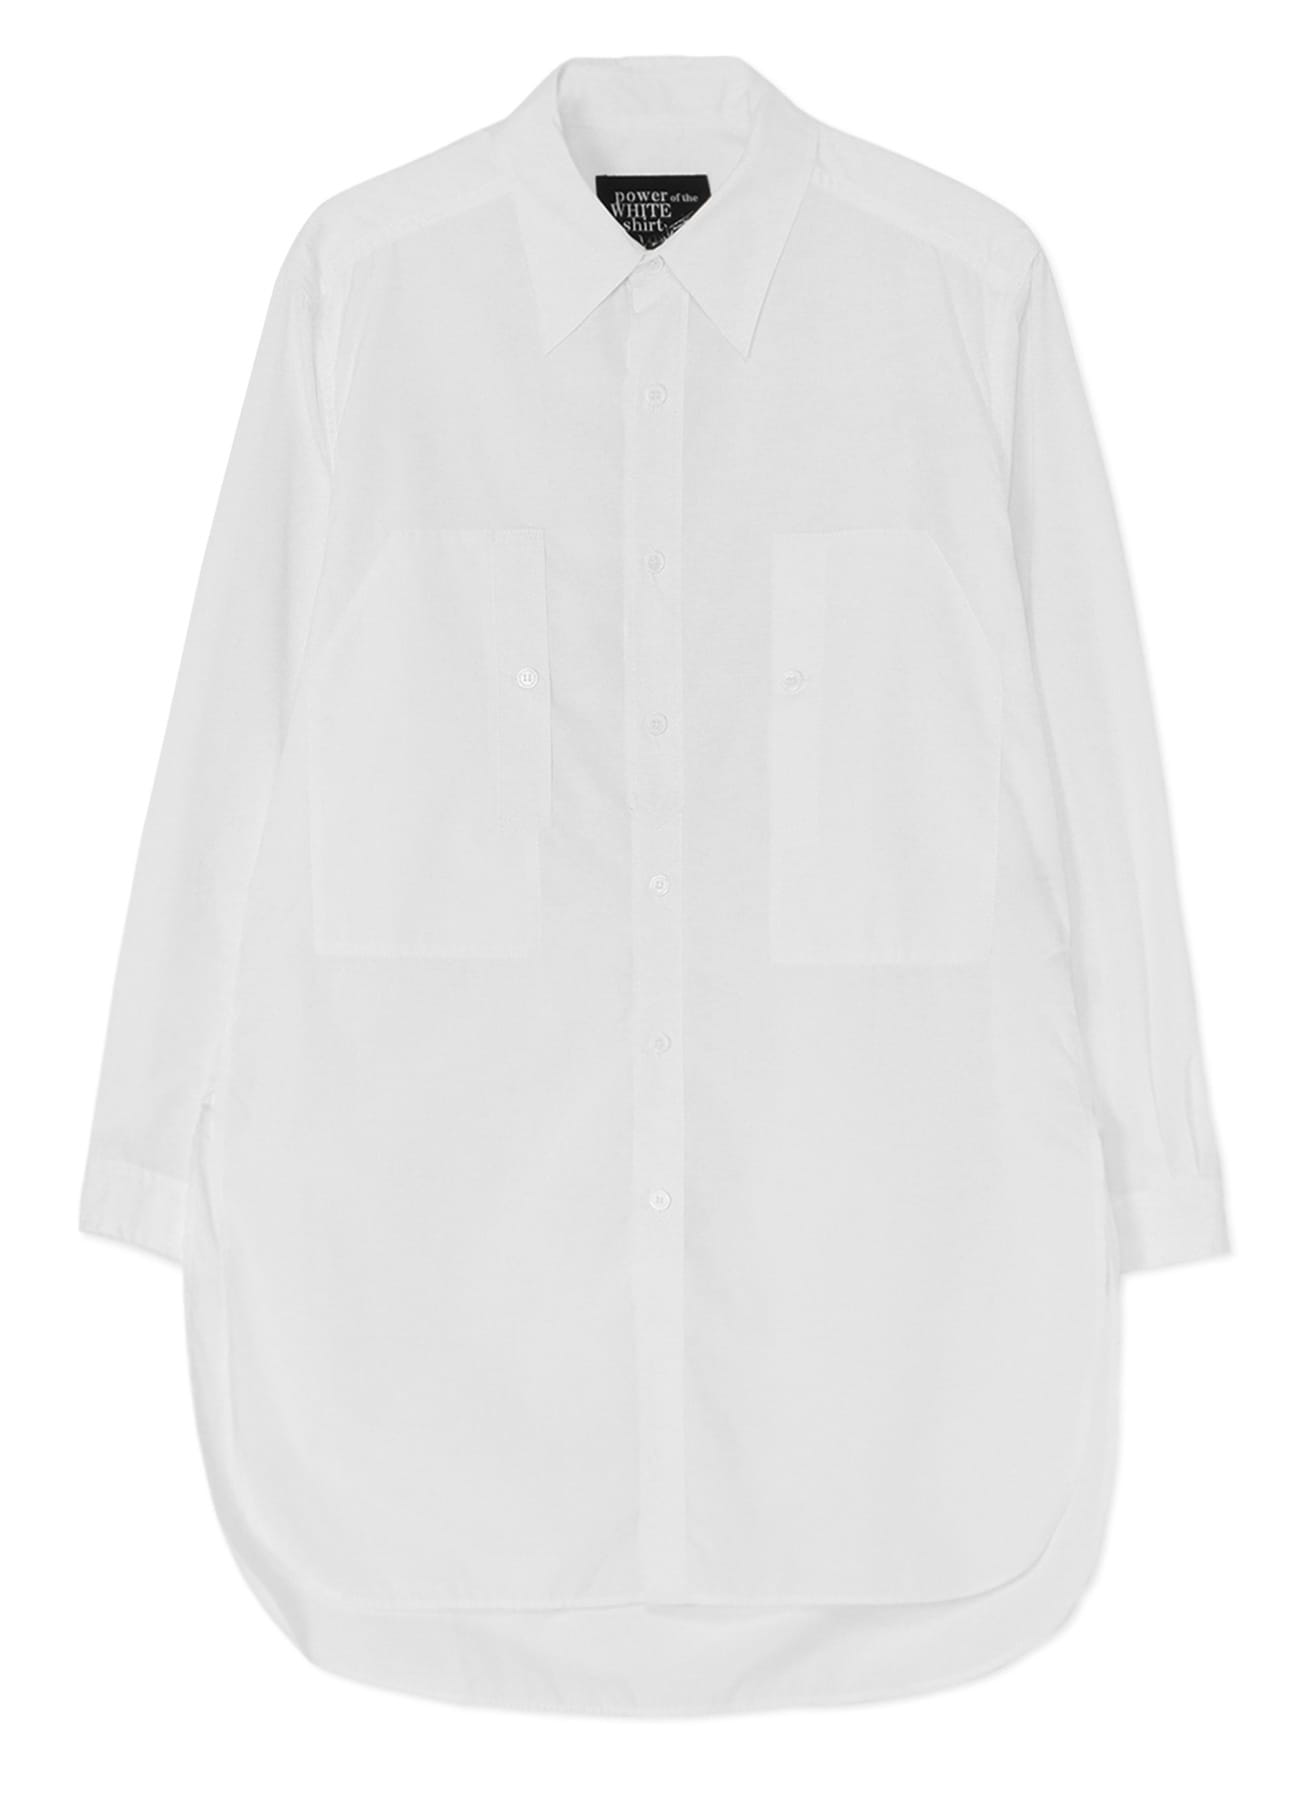 COTTON BROADCLOTH ROUNDED HEM DOUBLE CHEST POCKET SHIRT(S White): power ...